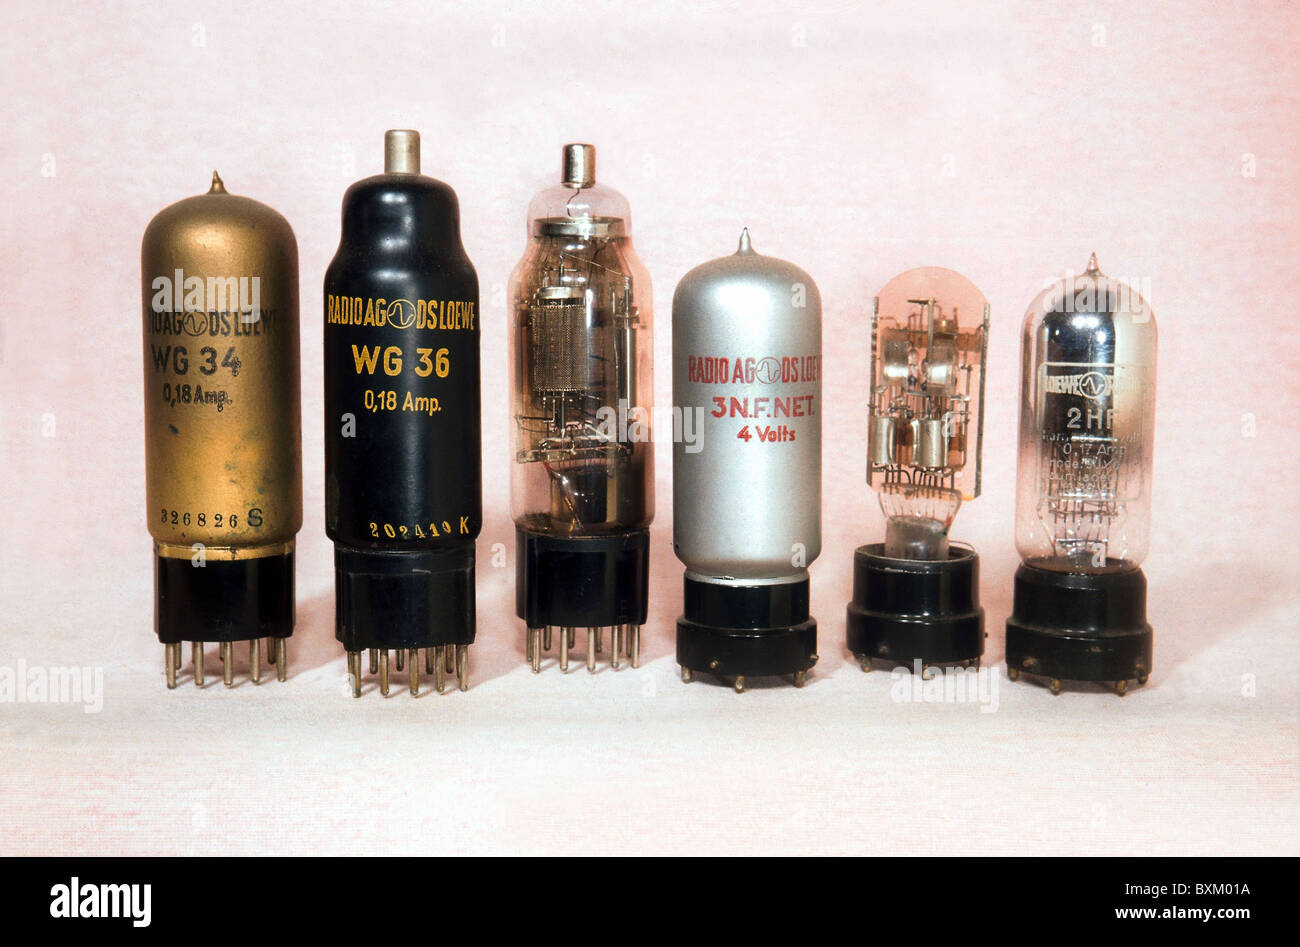 broadcast, radio, radio valves of Radio AG D.S. Loewe, Berlin, Germany, circa 1926, 1920s, 20s, 20th century, historic, historical, variants, version, from left: WG 34, 2x WG 36, 2 x 3NF.NET, 2 HF, engineering, technology, technologies, studio shot, 1930s, Additional-Rights-Clearences-Not Available Stock Photo